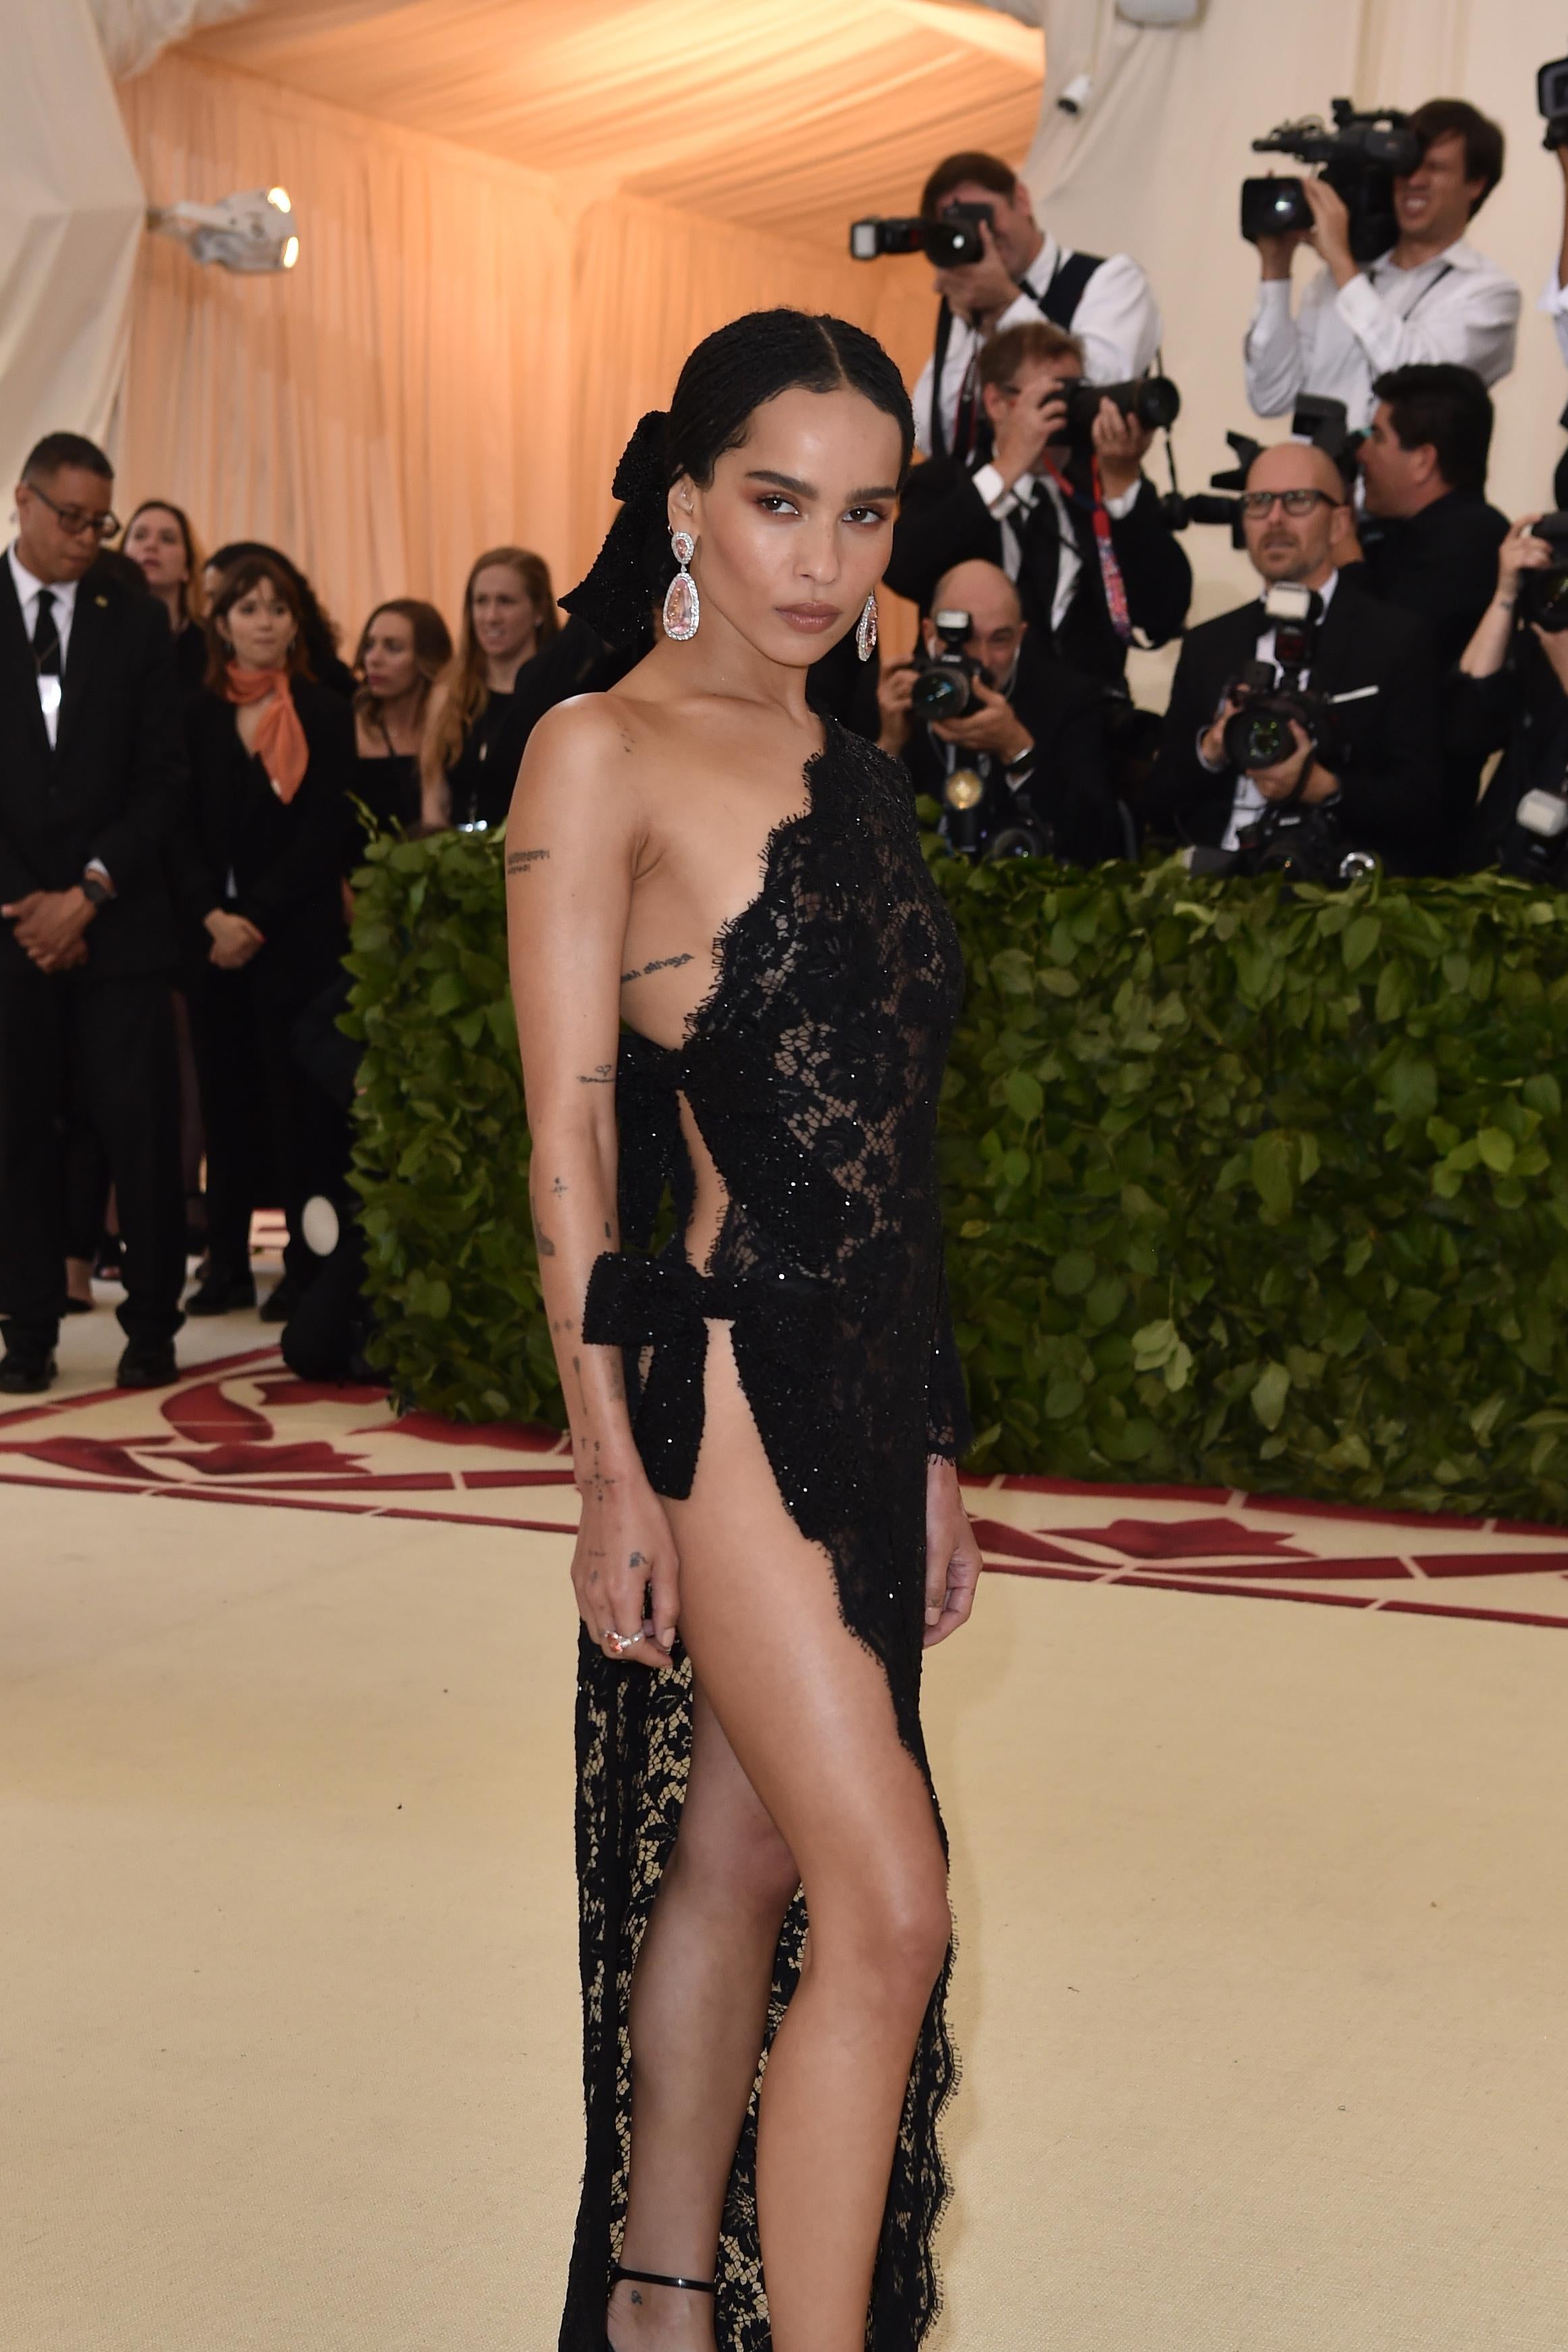 Zoe Kravitz arrives for the 2018 Met Gala on May 7, 2018, at the Metropolitan Museum of Art in New York. - The Gala raises money for the Metropolitan Museum of Arts Costume Institute. The Gala's 2018 theme is Heavenly Bodies: Fashion and the Catholic Imagination. (Photo by Hector RETAMAL / AFP)        (Photo credit should read HECTOR RETAMAL/AFP/Getty Images)